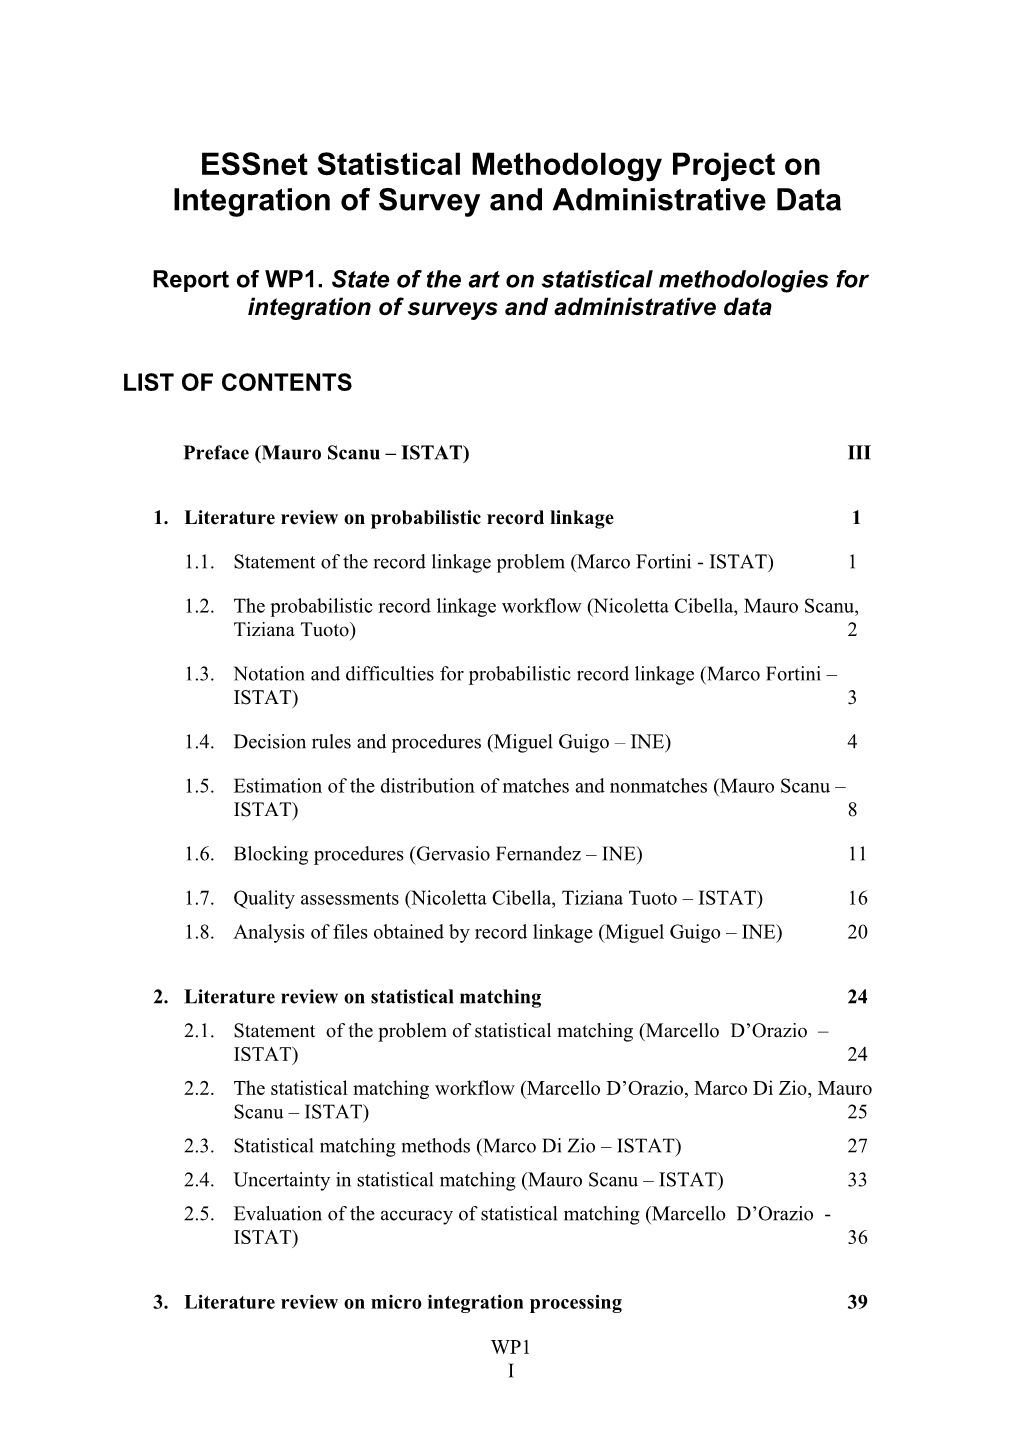 Report of WP1 of the CENEX on Statistical Methodology